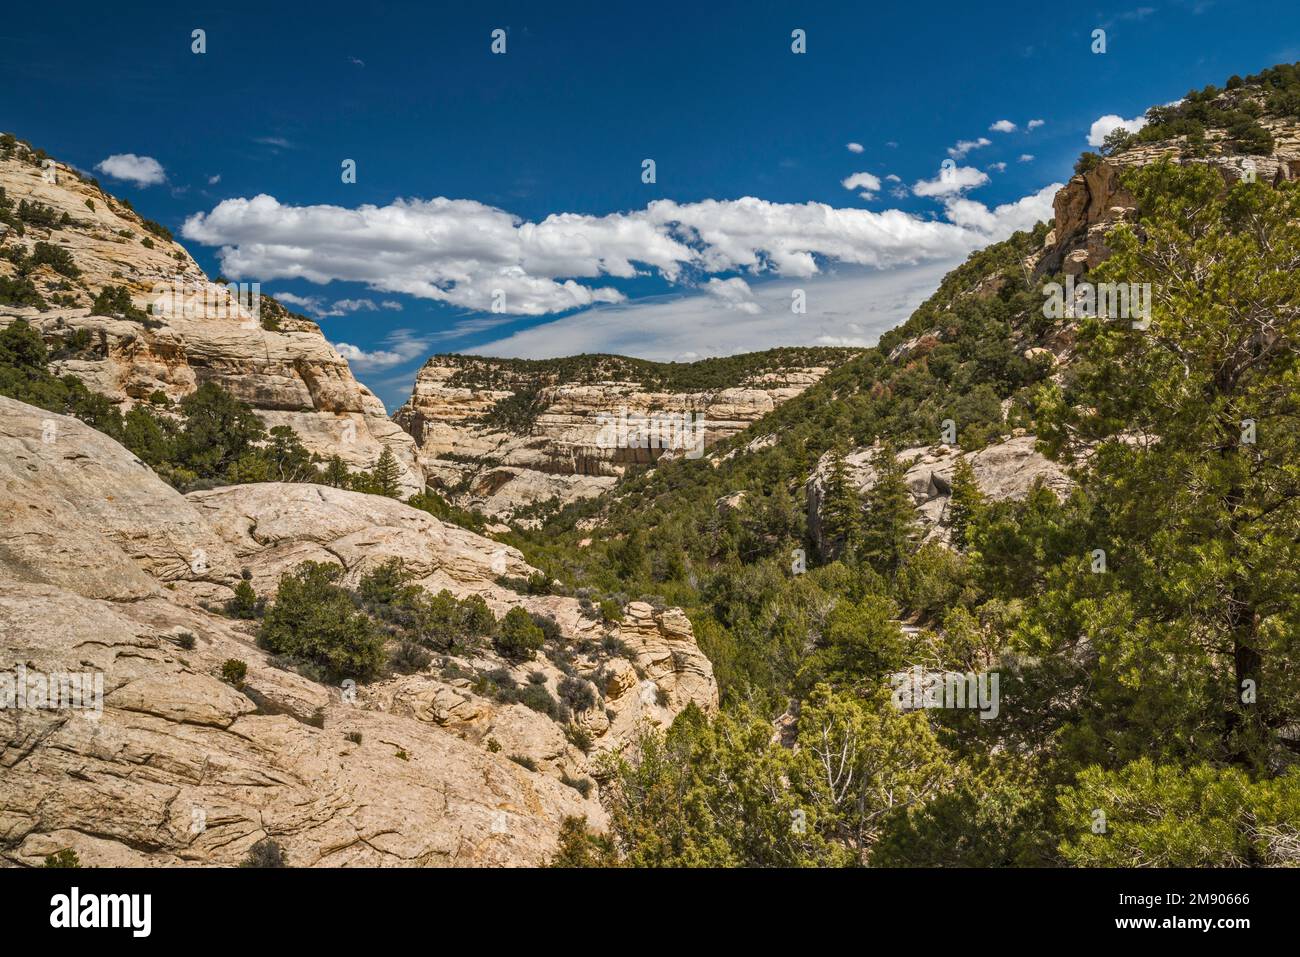 Slickrock formations, pinyon juniper forest in Sand Canyon, Echo Park Road, Dinosaur National Monument, Colorado, USA Stock Photo